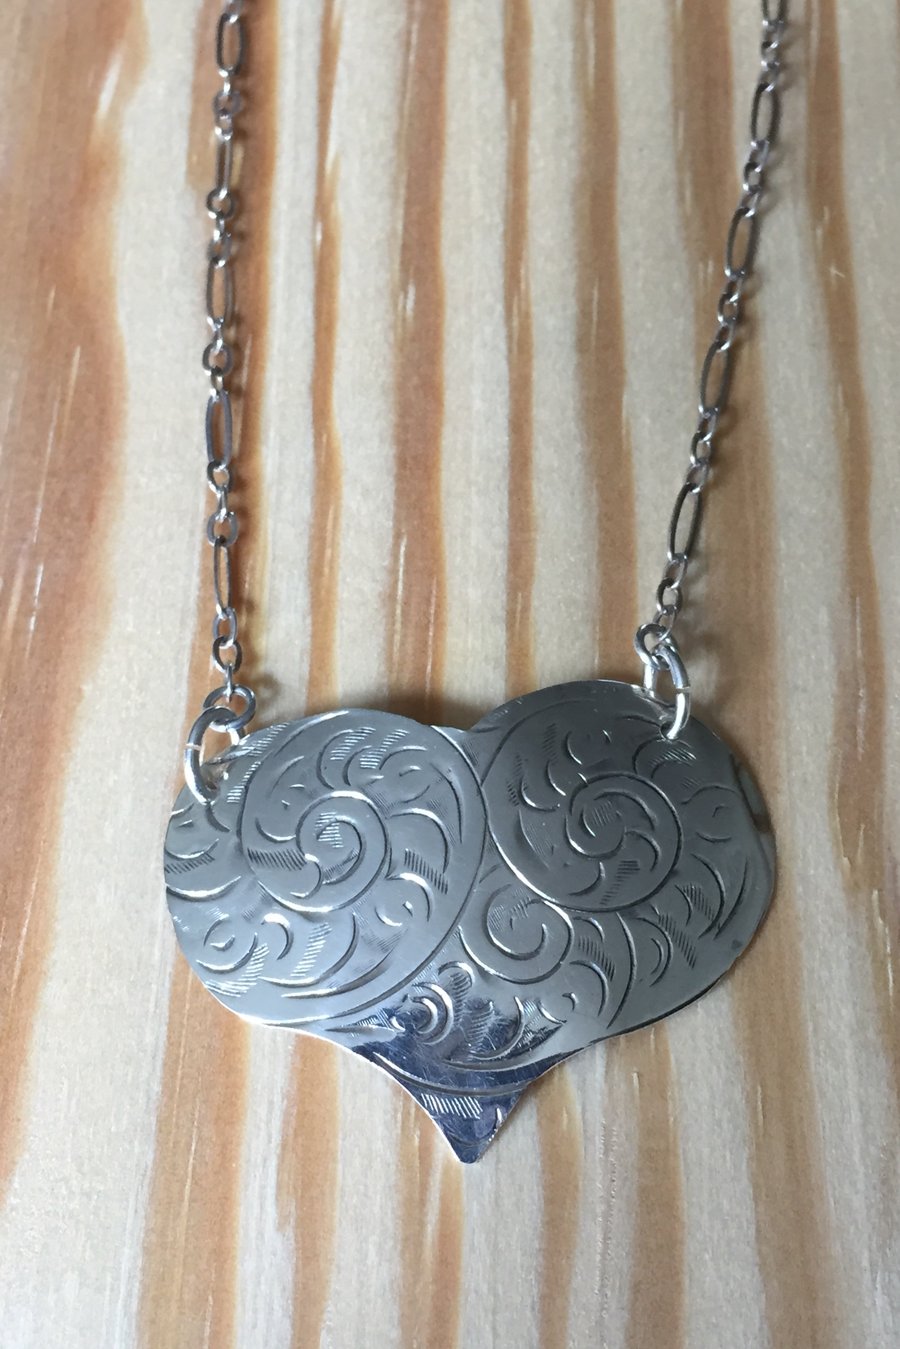 Heart shaped silver necklace